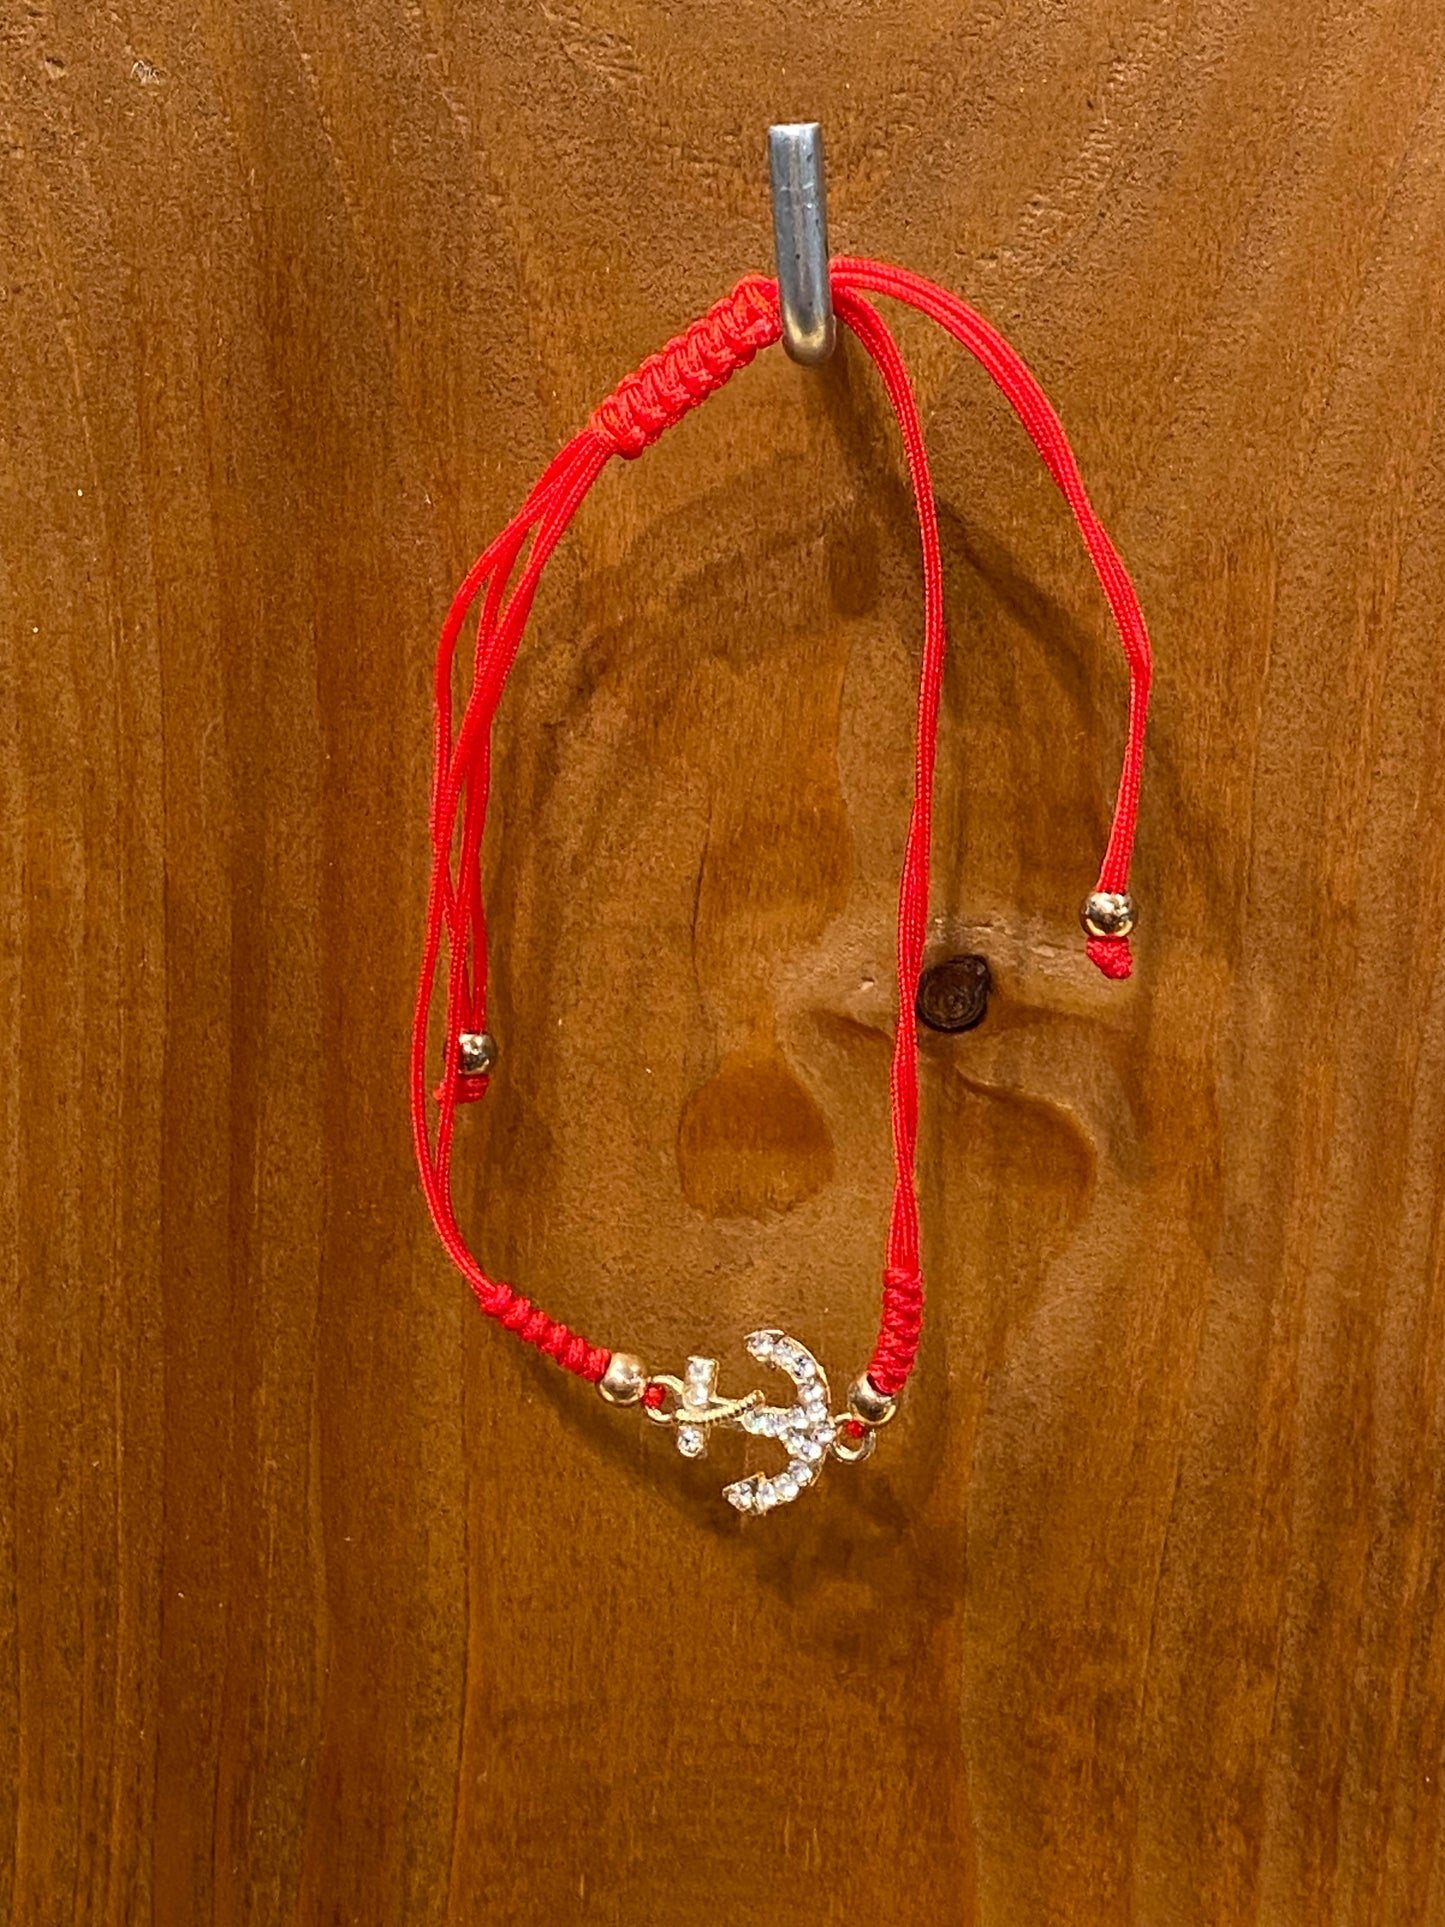 Red String Pull Tie Bracelet Rhinestone Anchor Charm and Golden Beads